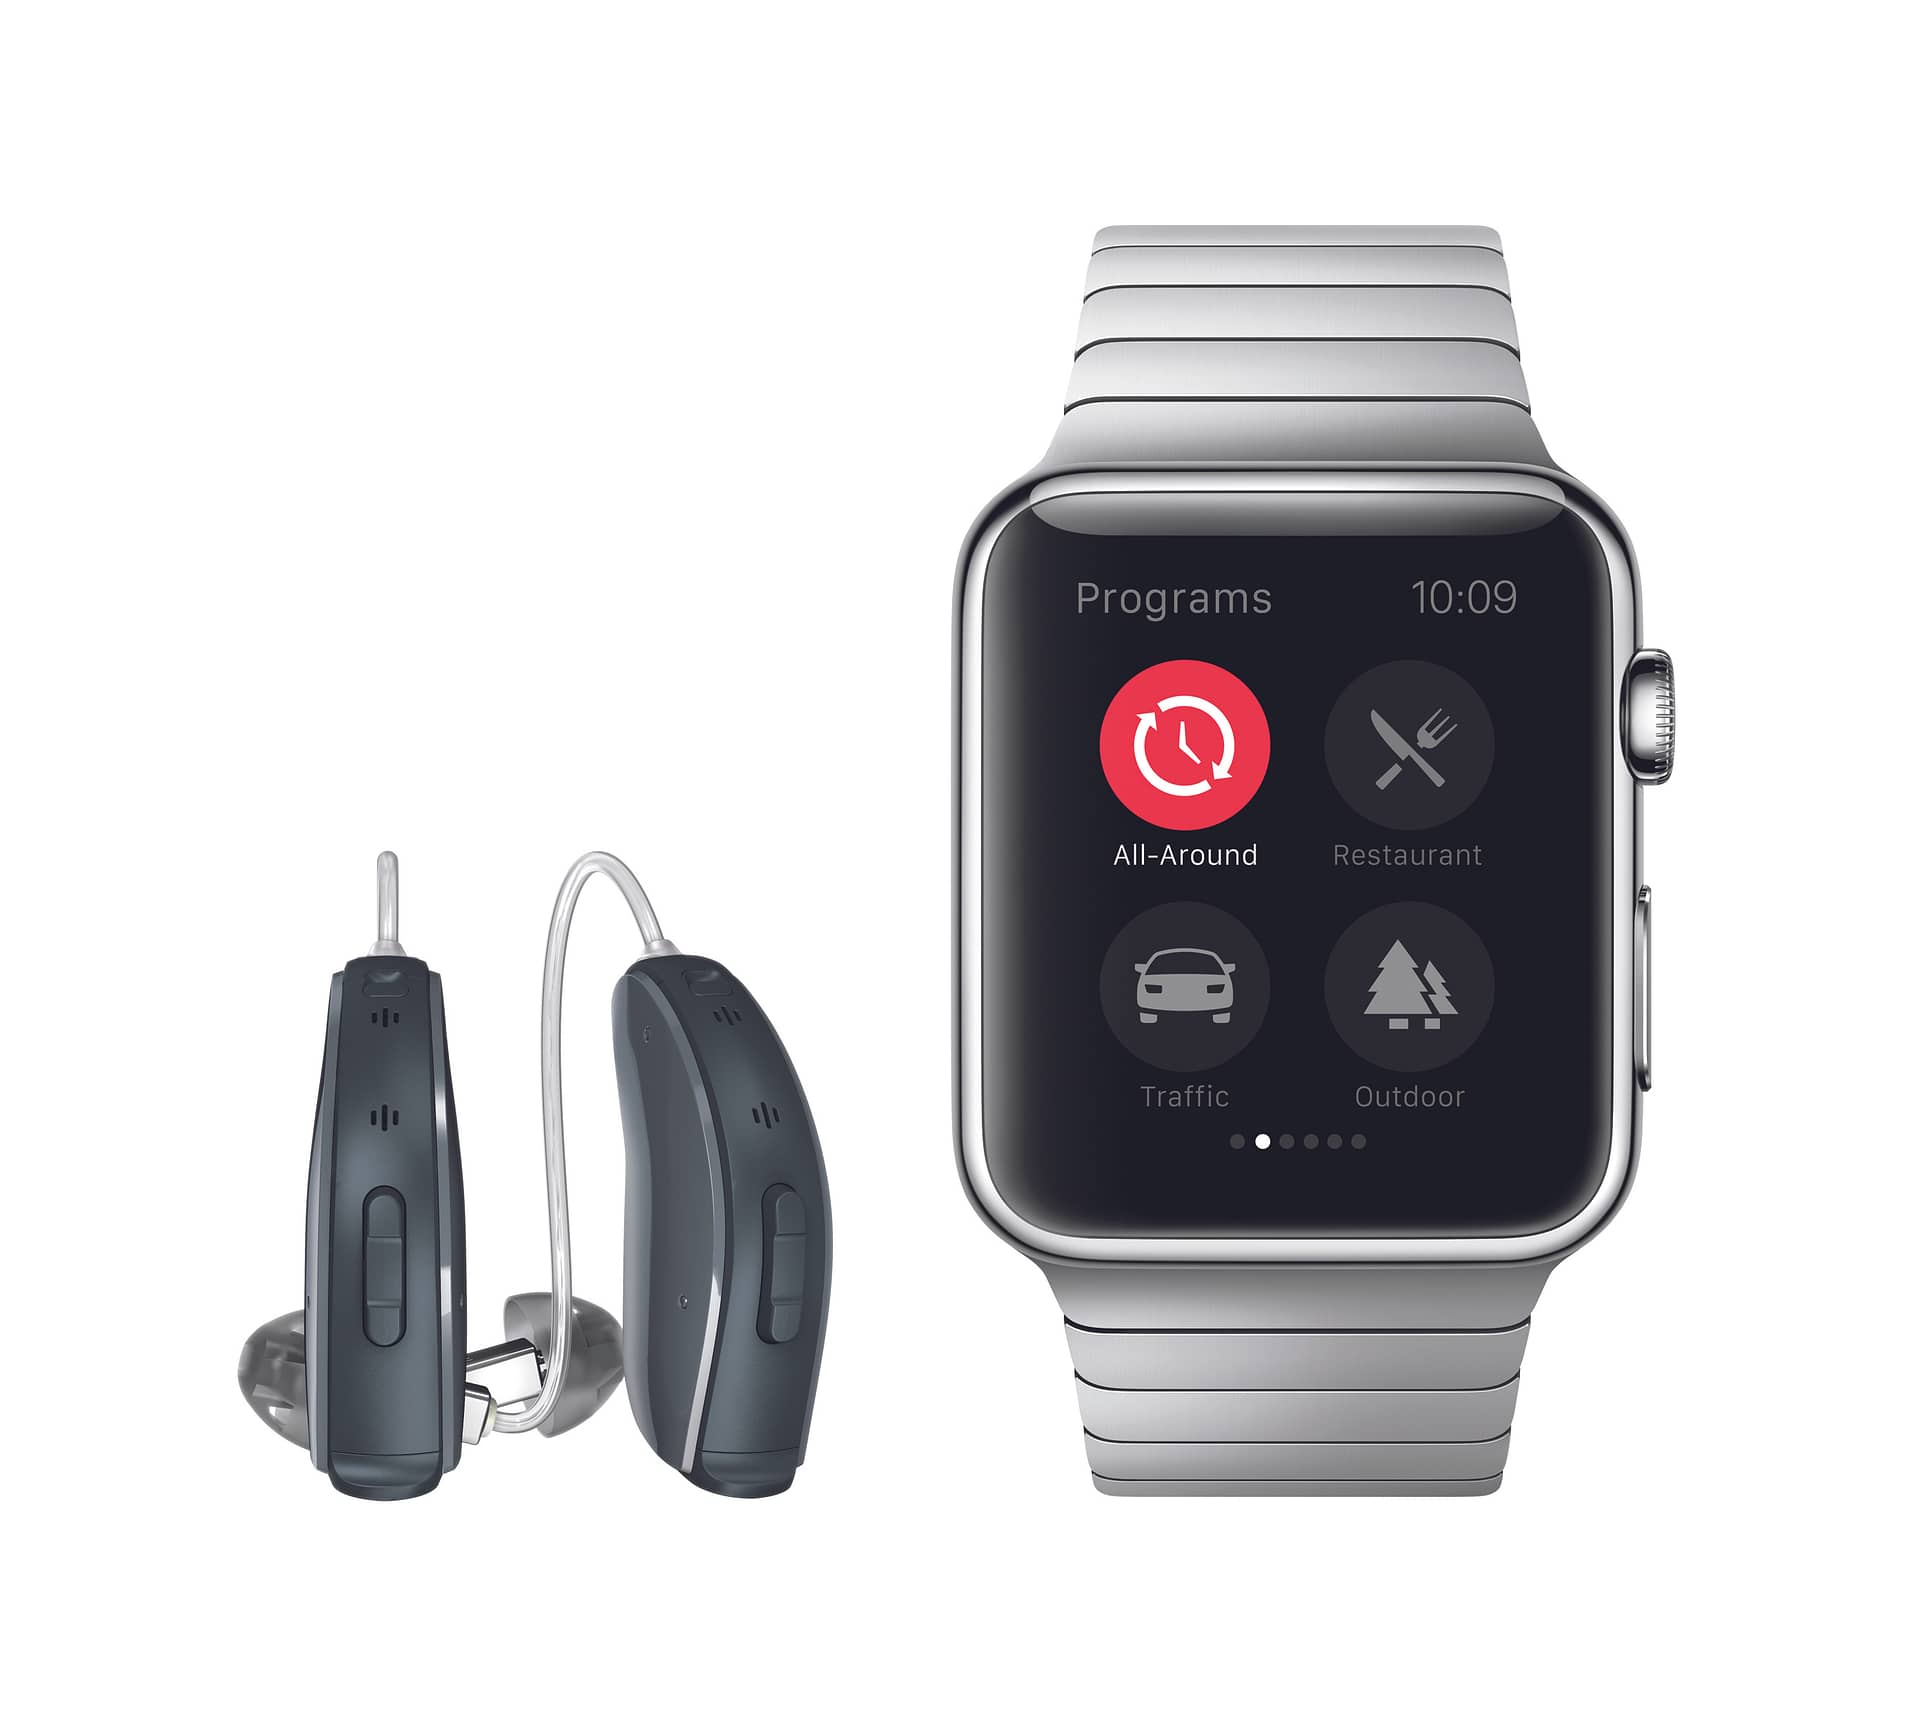 Apple Watch with a Smart App and ReSound hearing aid is depicted.